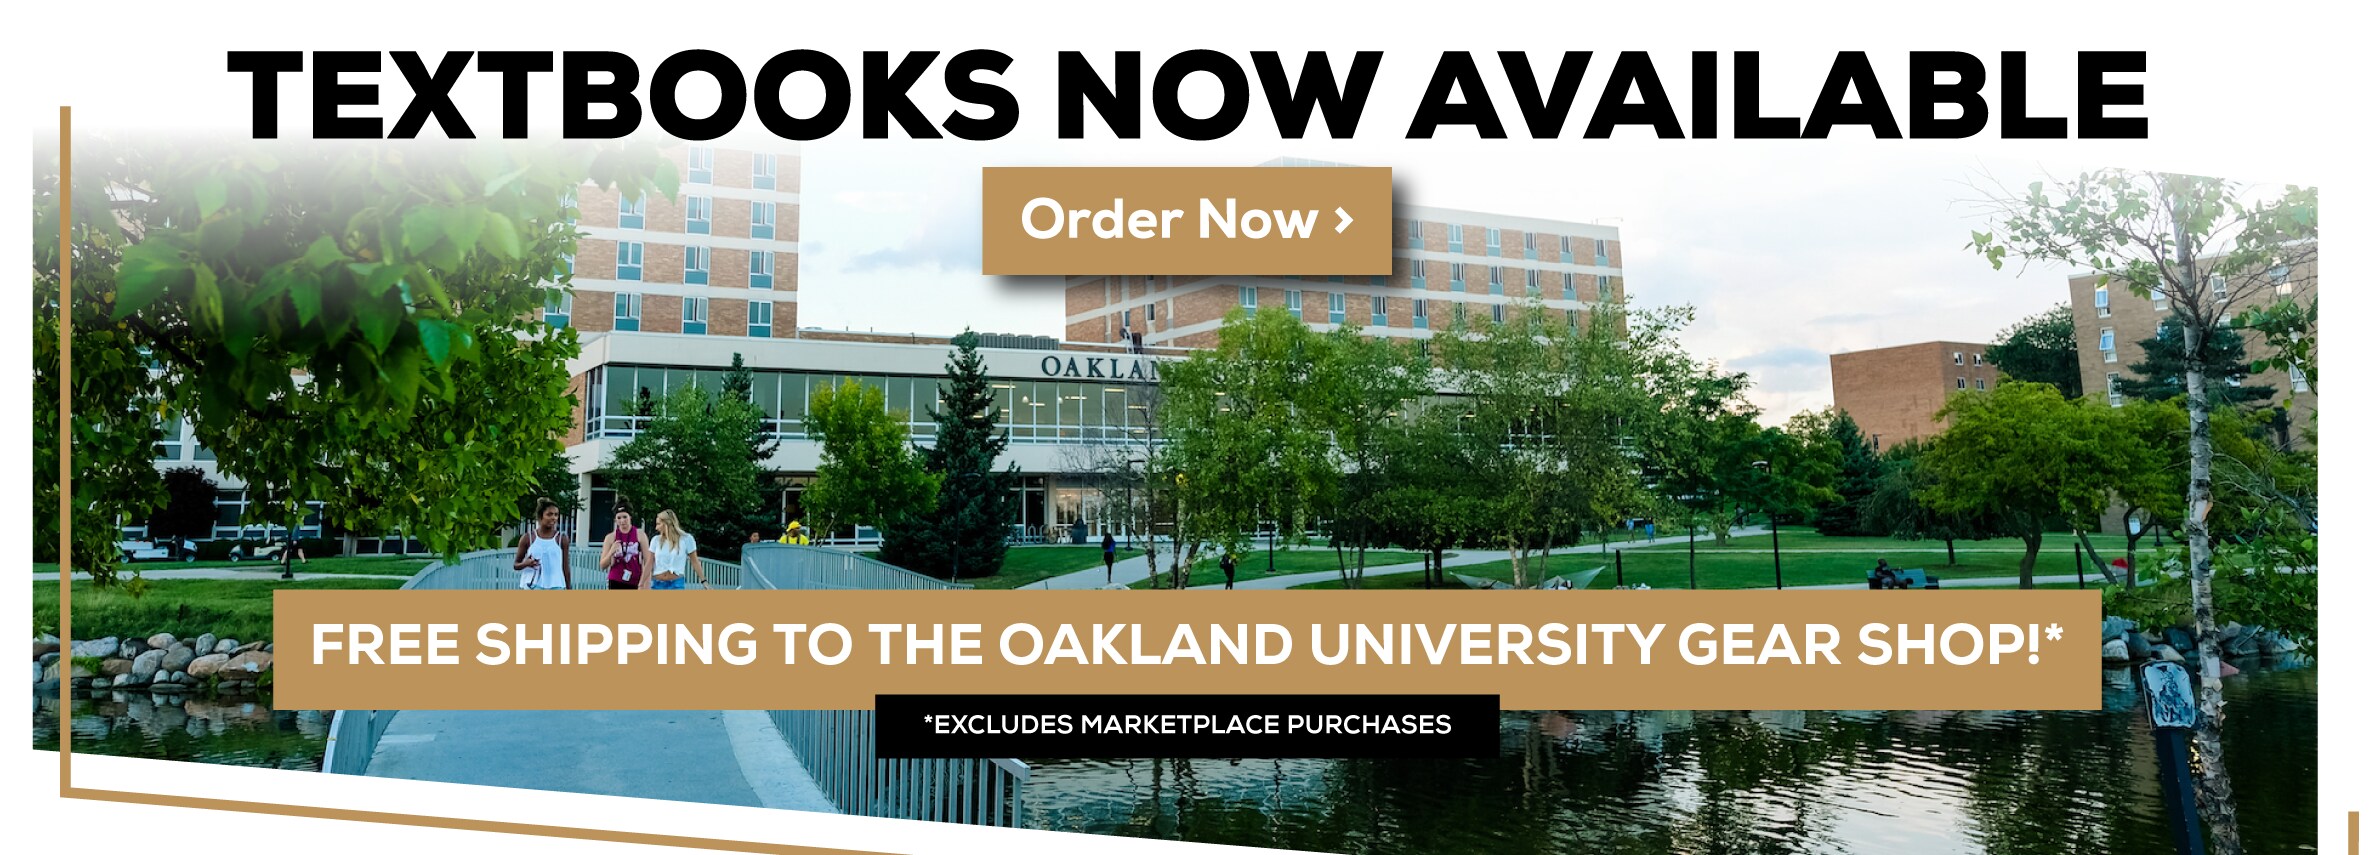 Textbooks Now Available. Free Shipping to the Oakland University Gear Shop. Excludes Marketplace Purchases.